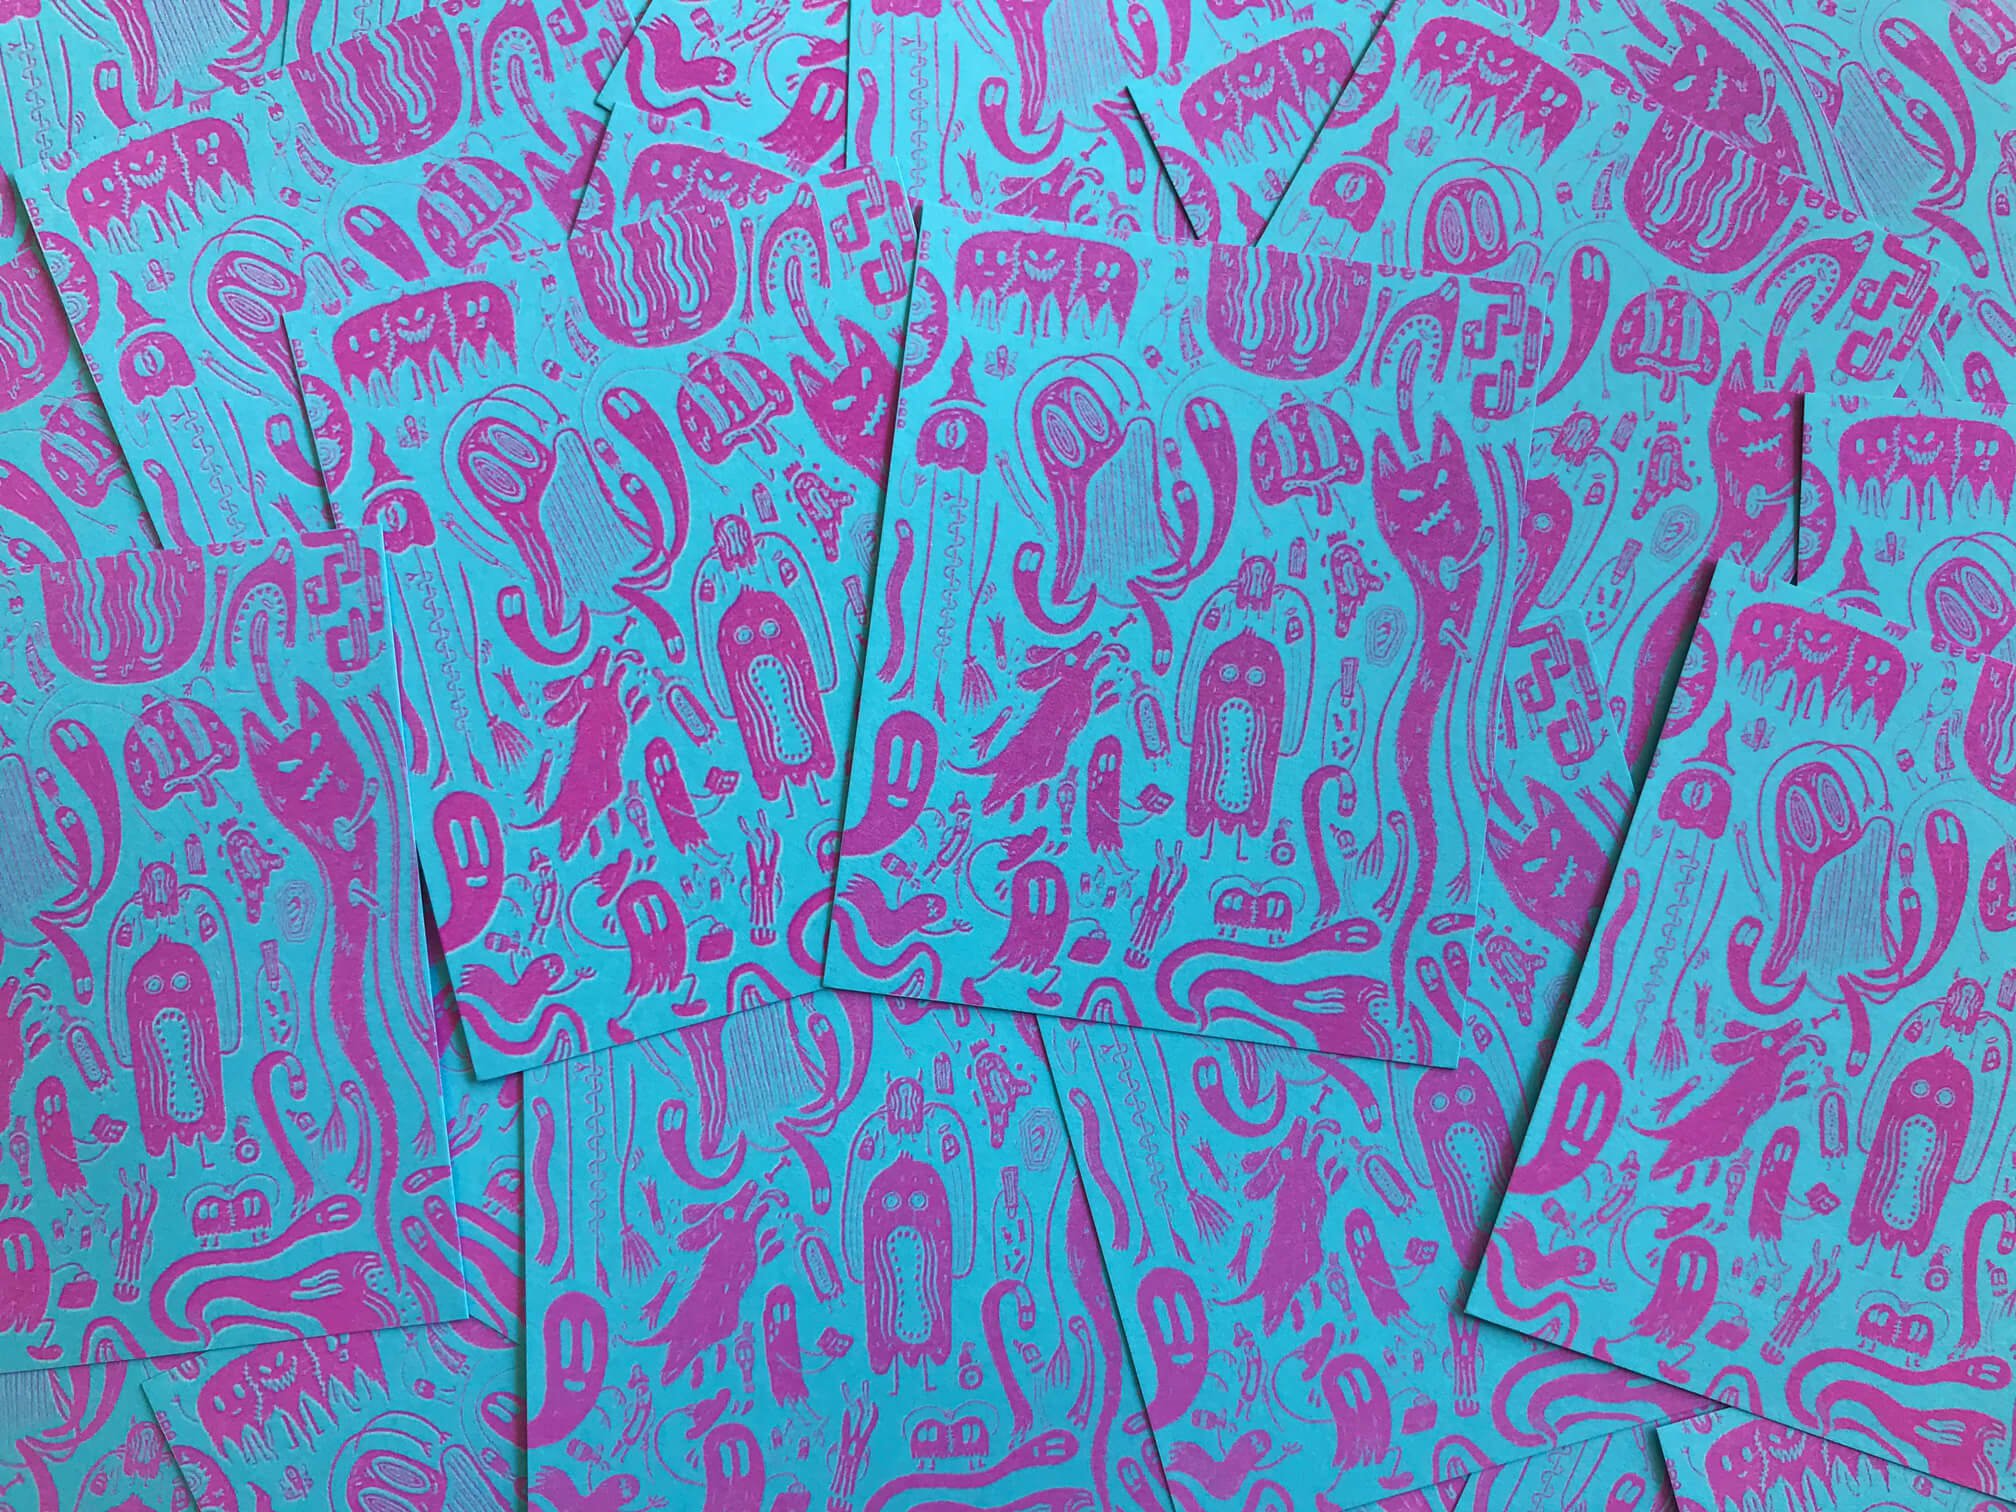 Mostly Ghostly Mini Risograph Print – Neon Blue & Shocking Pink